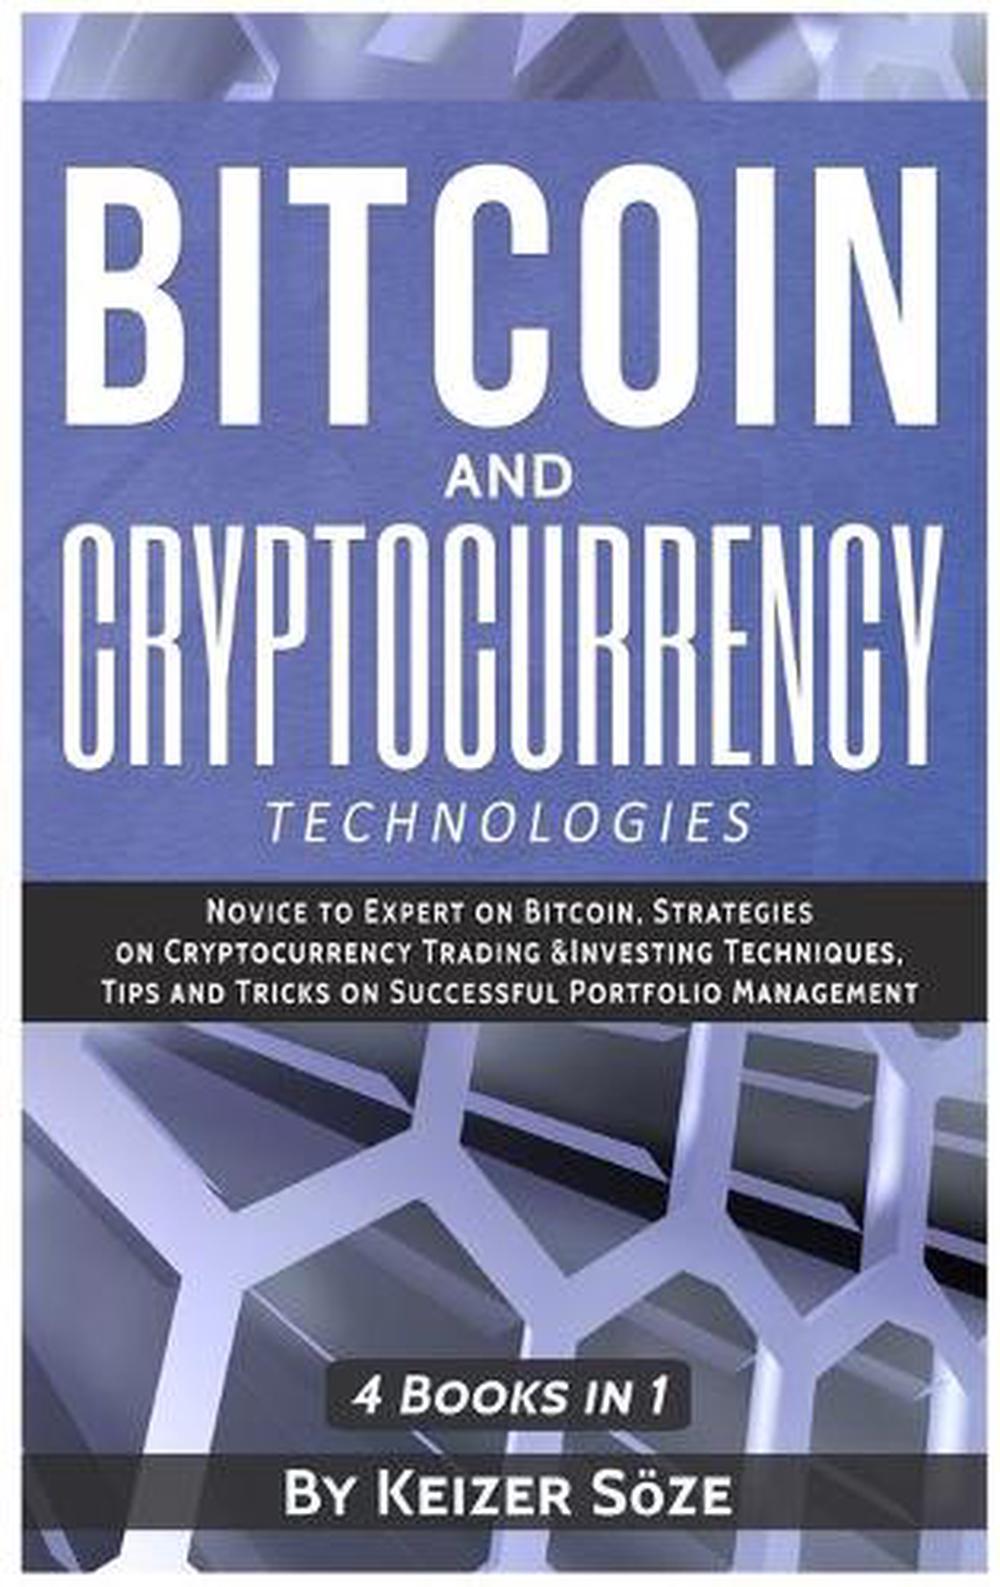 free bitcoin and cryptocurrency technologies book